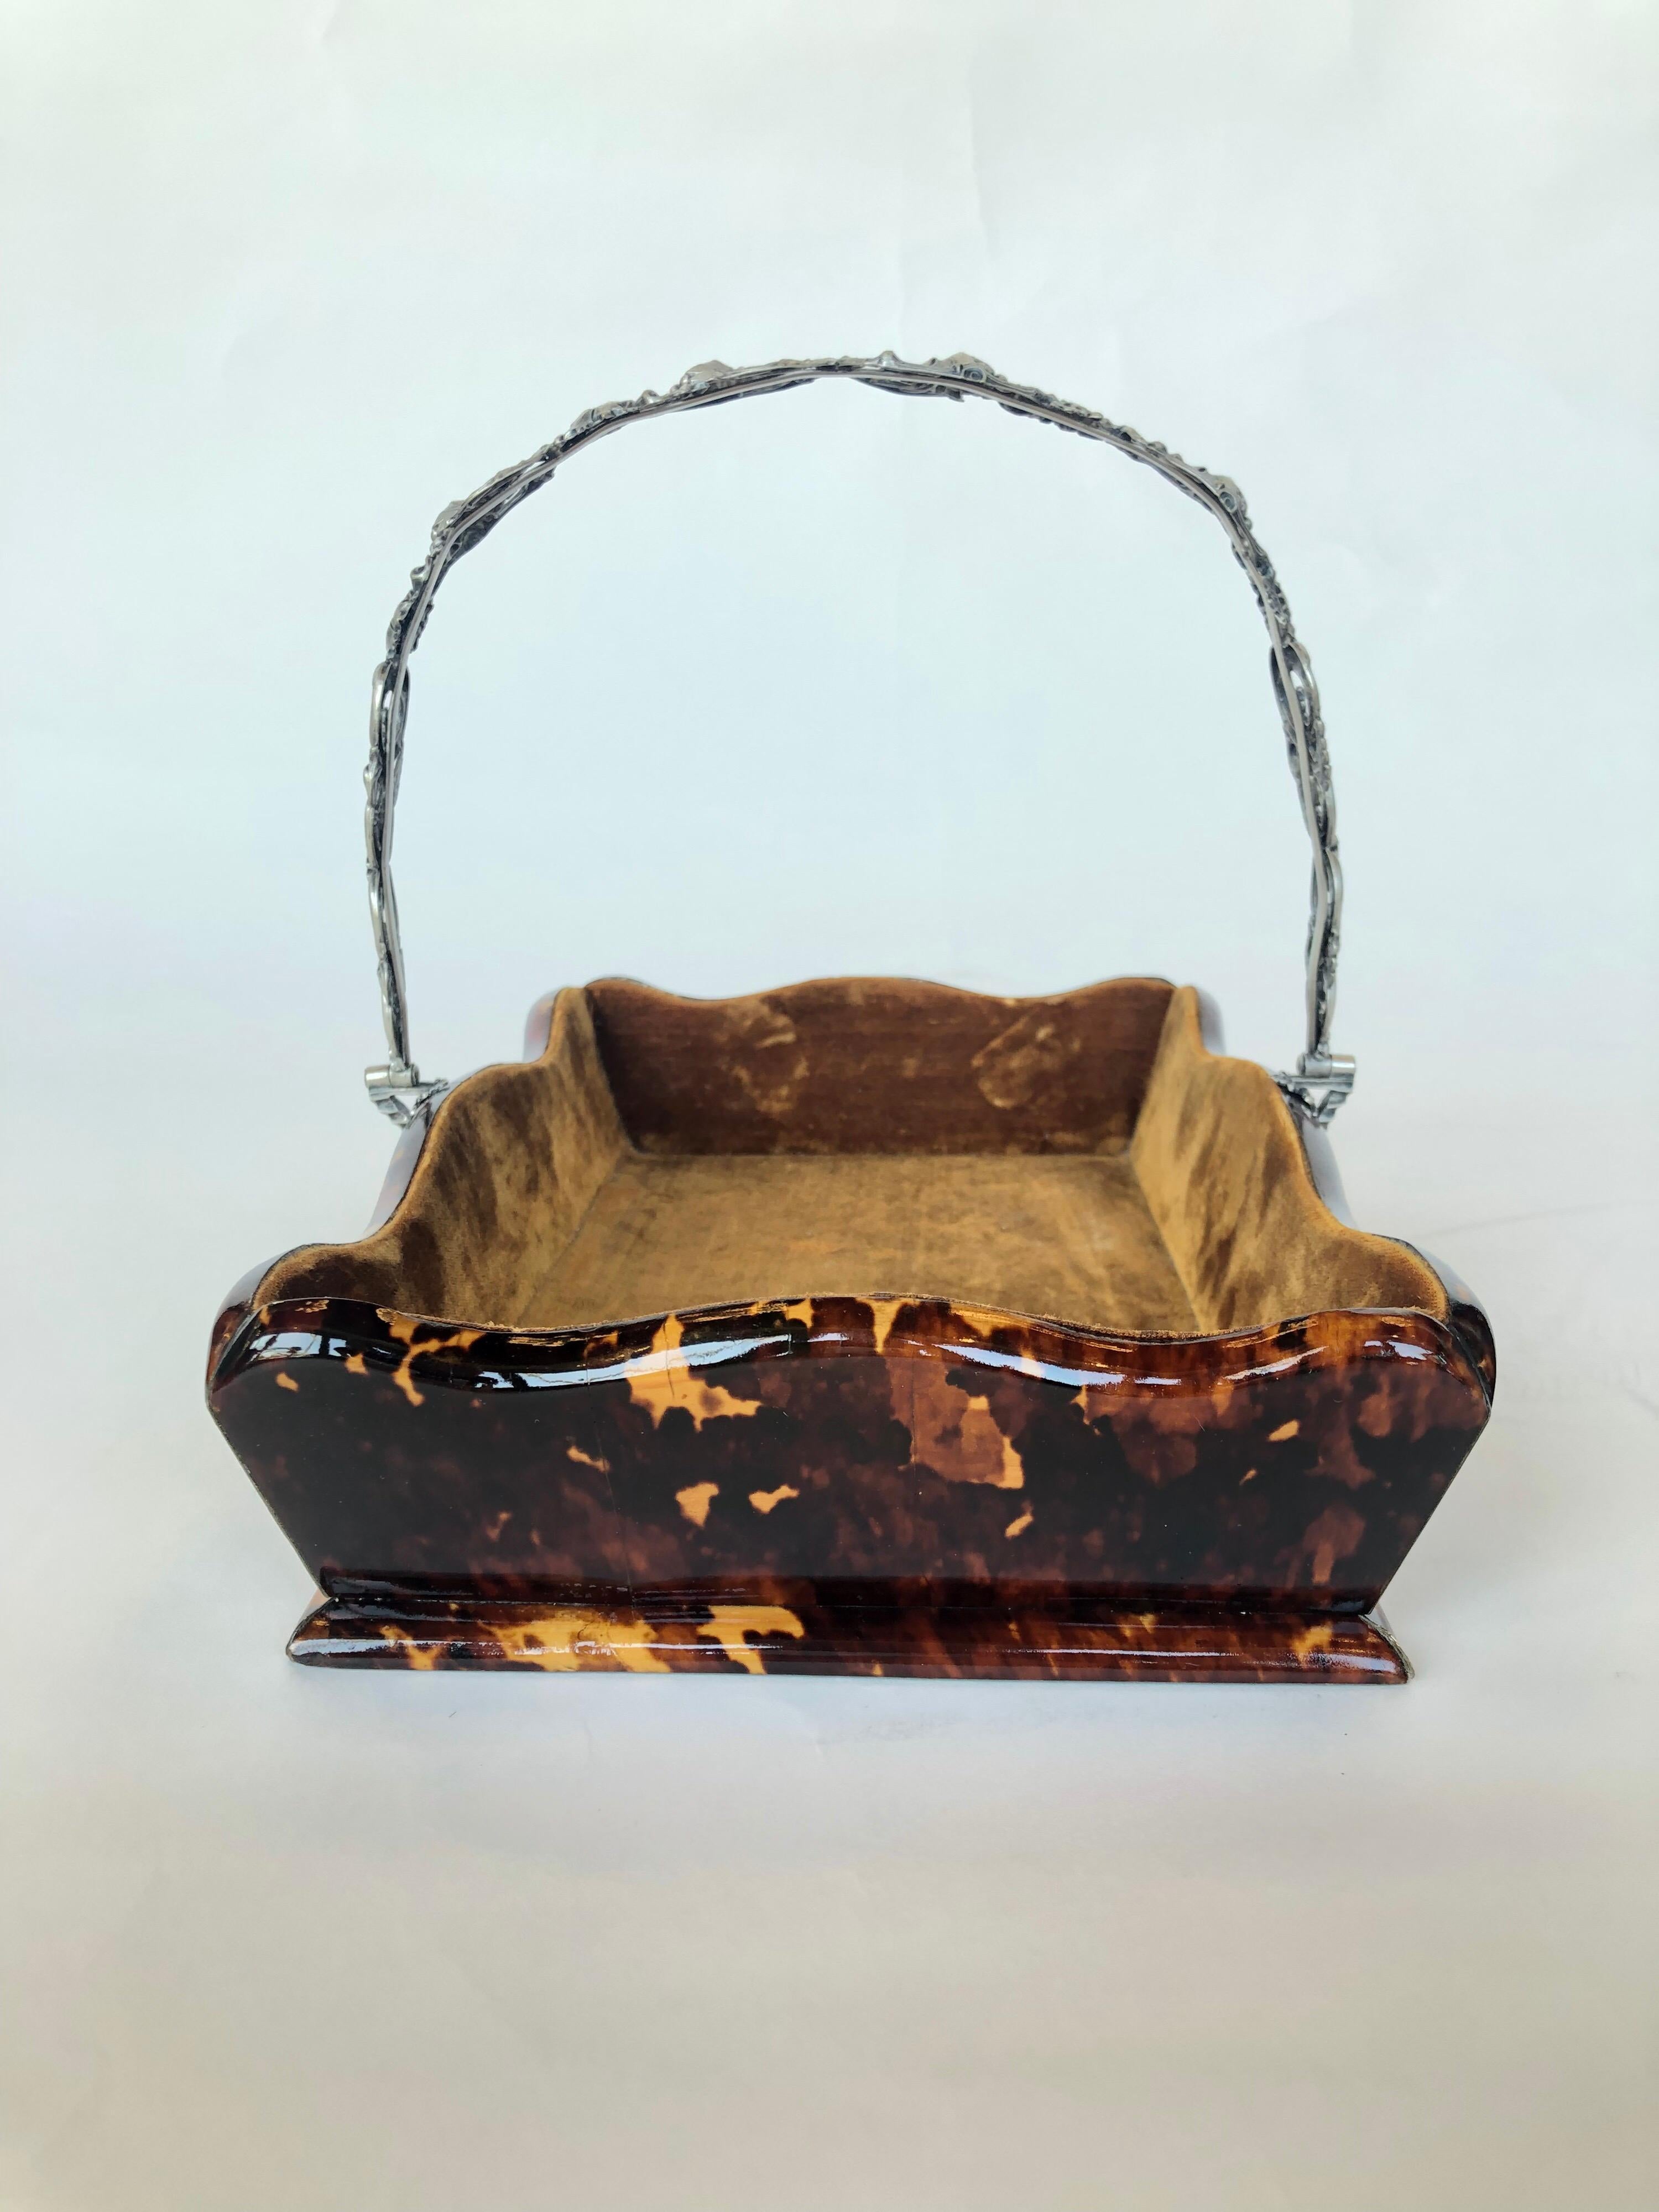 Tortoise Shell Glove Box and Basket For Sale 2